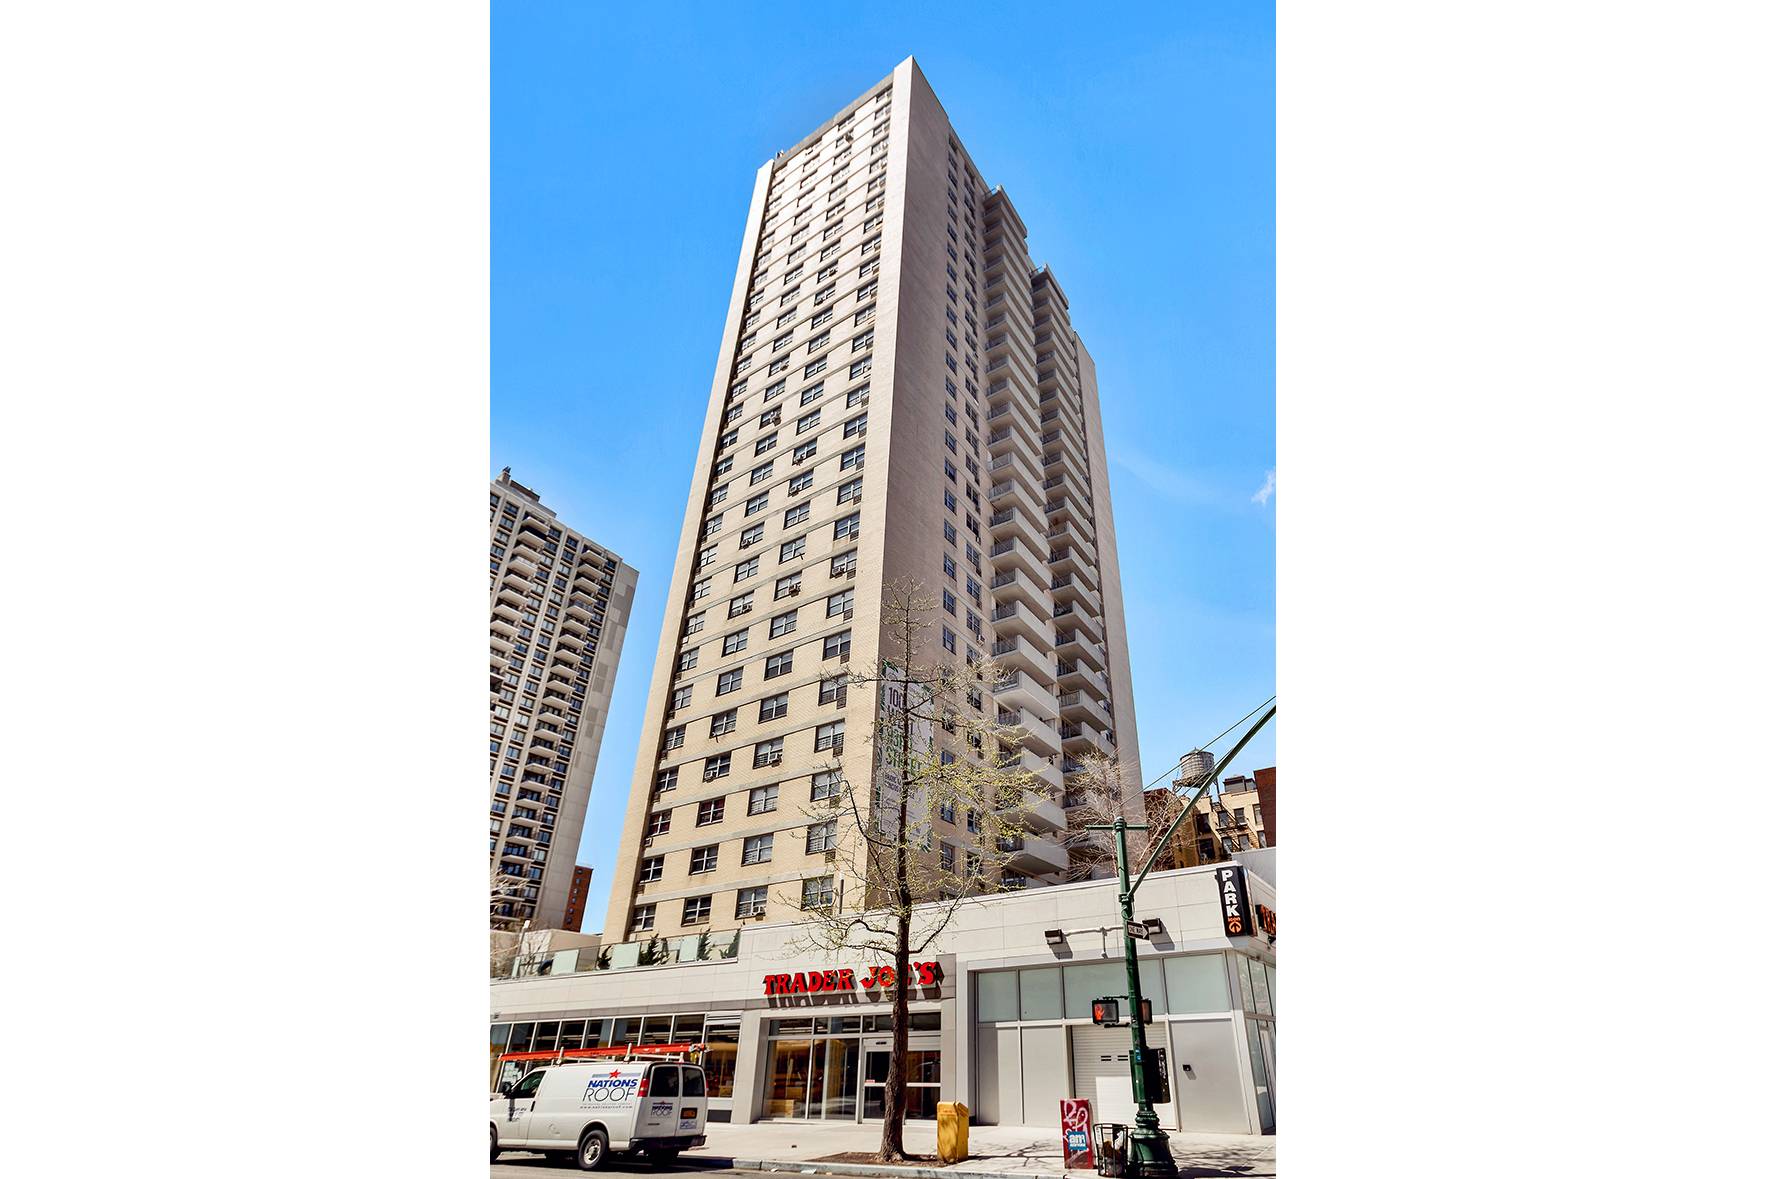 Rare opportunity to purchase a high floor unit in original condition in a prime condominium right above Trader Joe's.